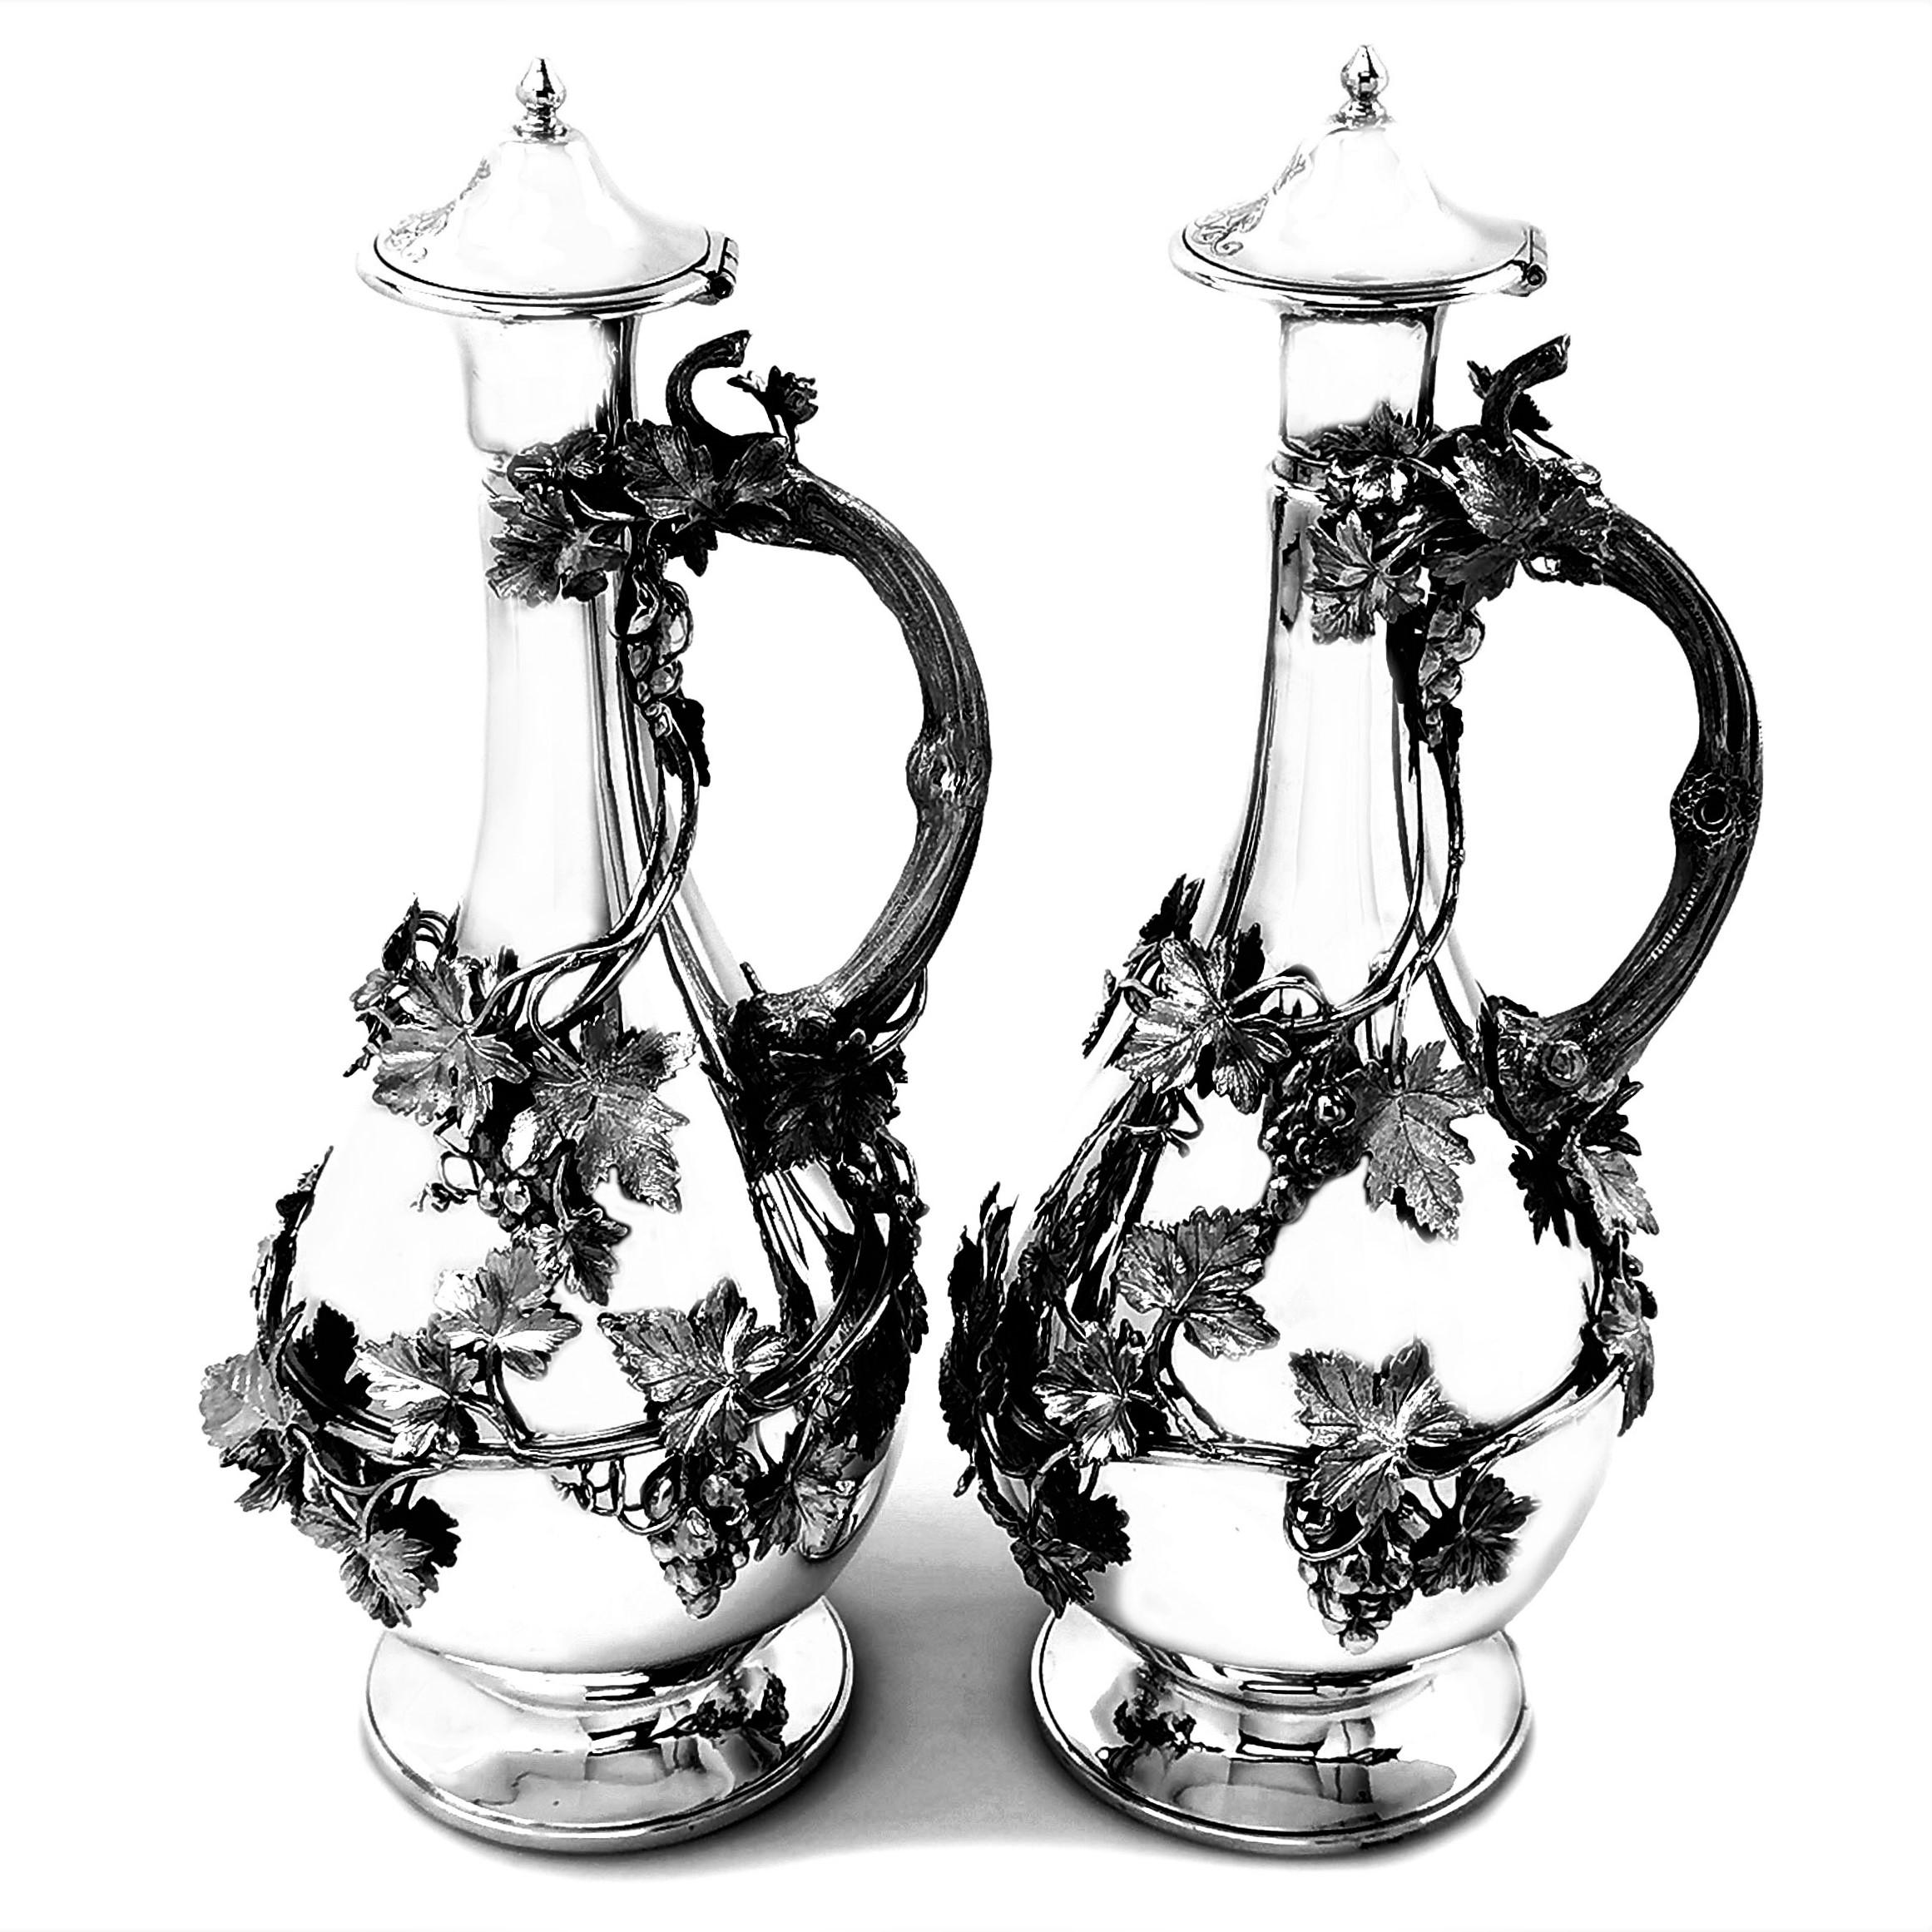 A magnificent pair of Antique Victorian Solid Silver Ewers with classic baluster shaped bodies and each standing on a spread pedestal foot. Each Jug is decorated with intricate applied vines with detailed leaves and grapes wrapping around the bodies